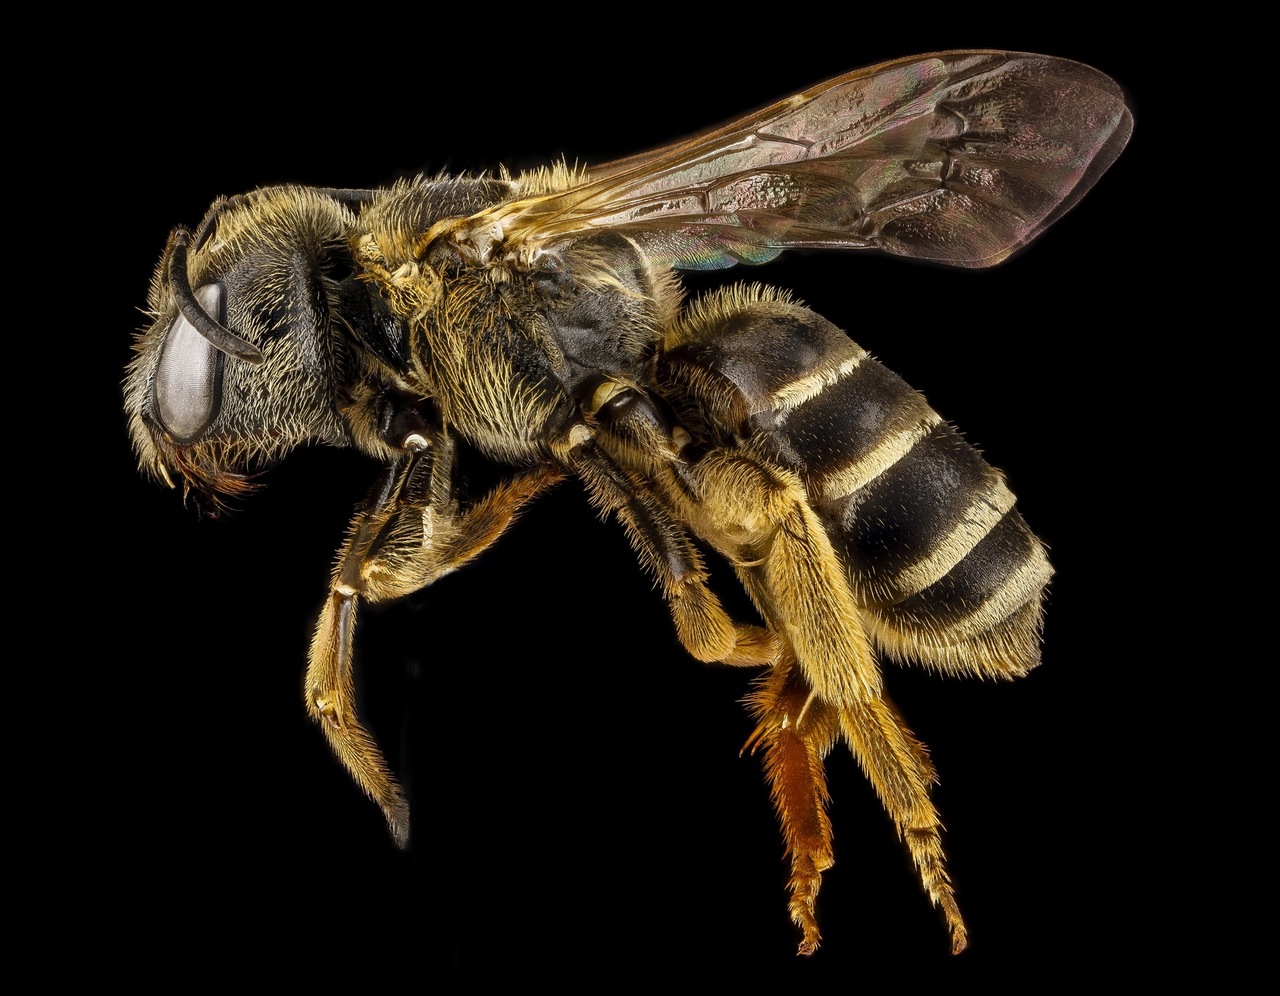 Can HIV Viruses be killed by Bee Sting?